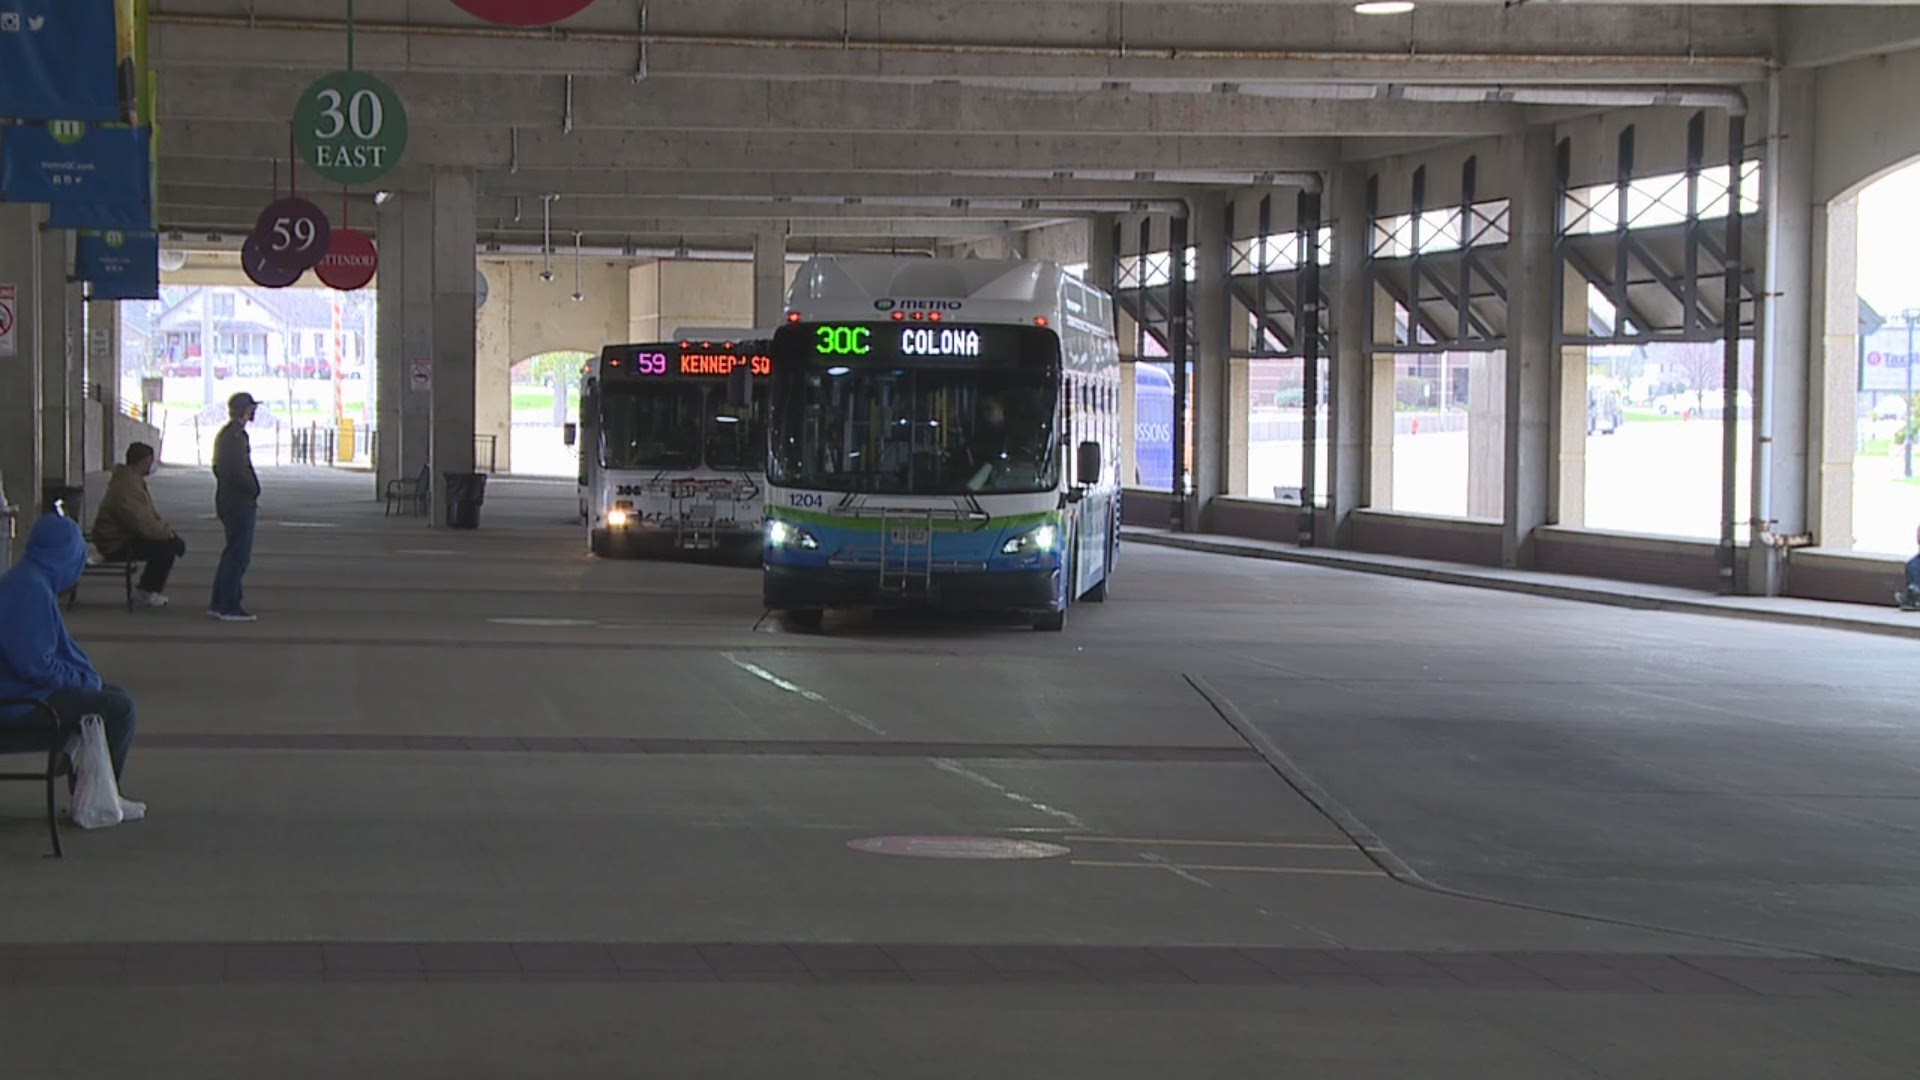 Right now, MetroLINK in the Quad Cities is running their full routes and schedules, seven days a week.